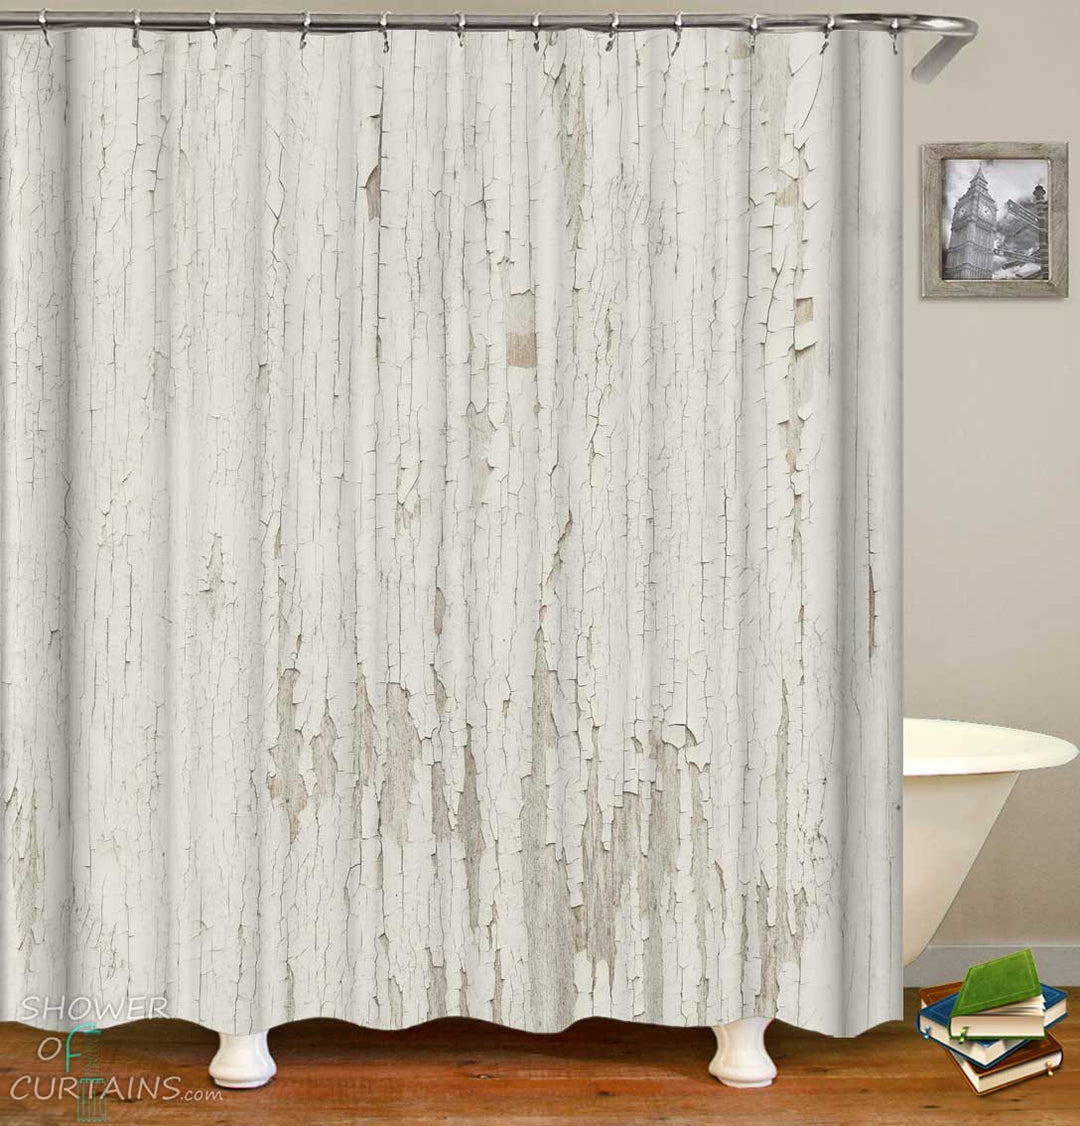 Shower Curtains with Worn Out White Wall